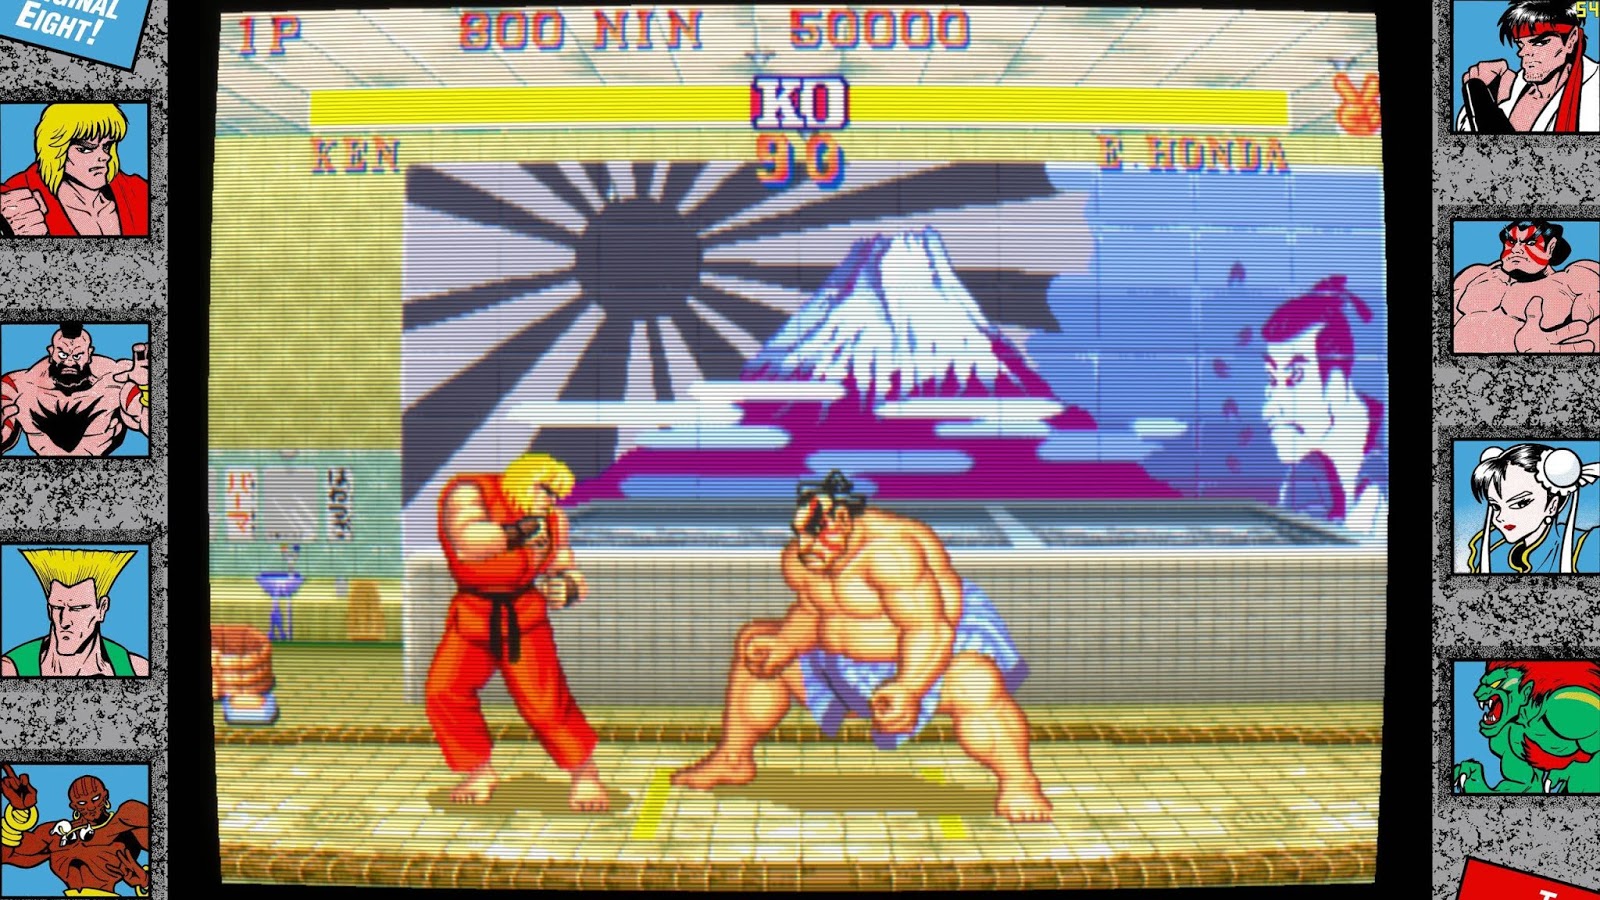 Vega Street Fighter 2 Turbo moves list, strategy guide, combos and  character overview